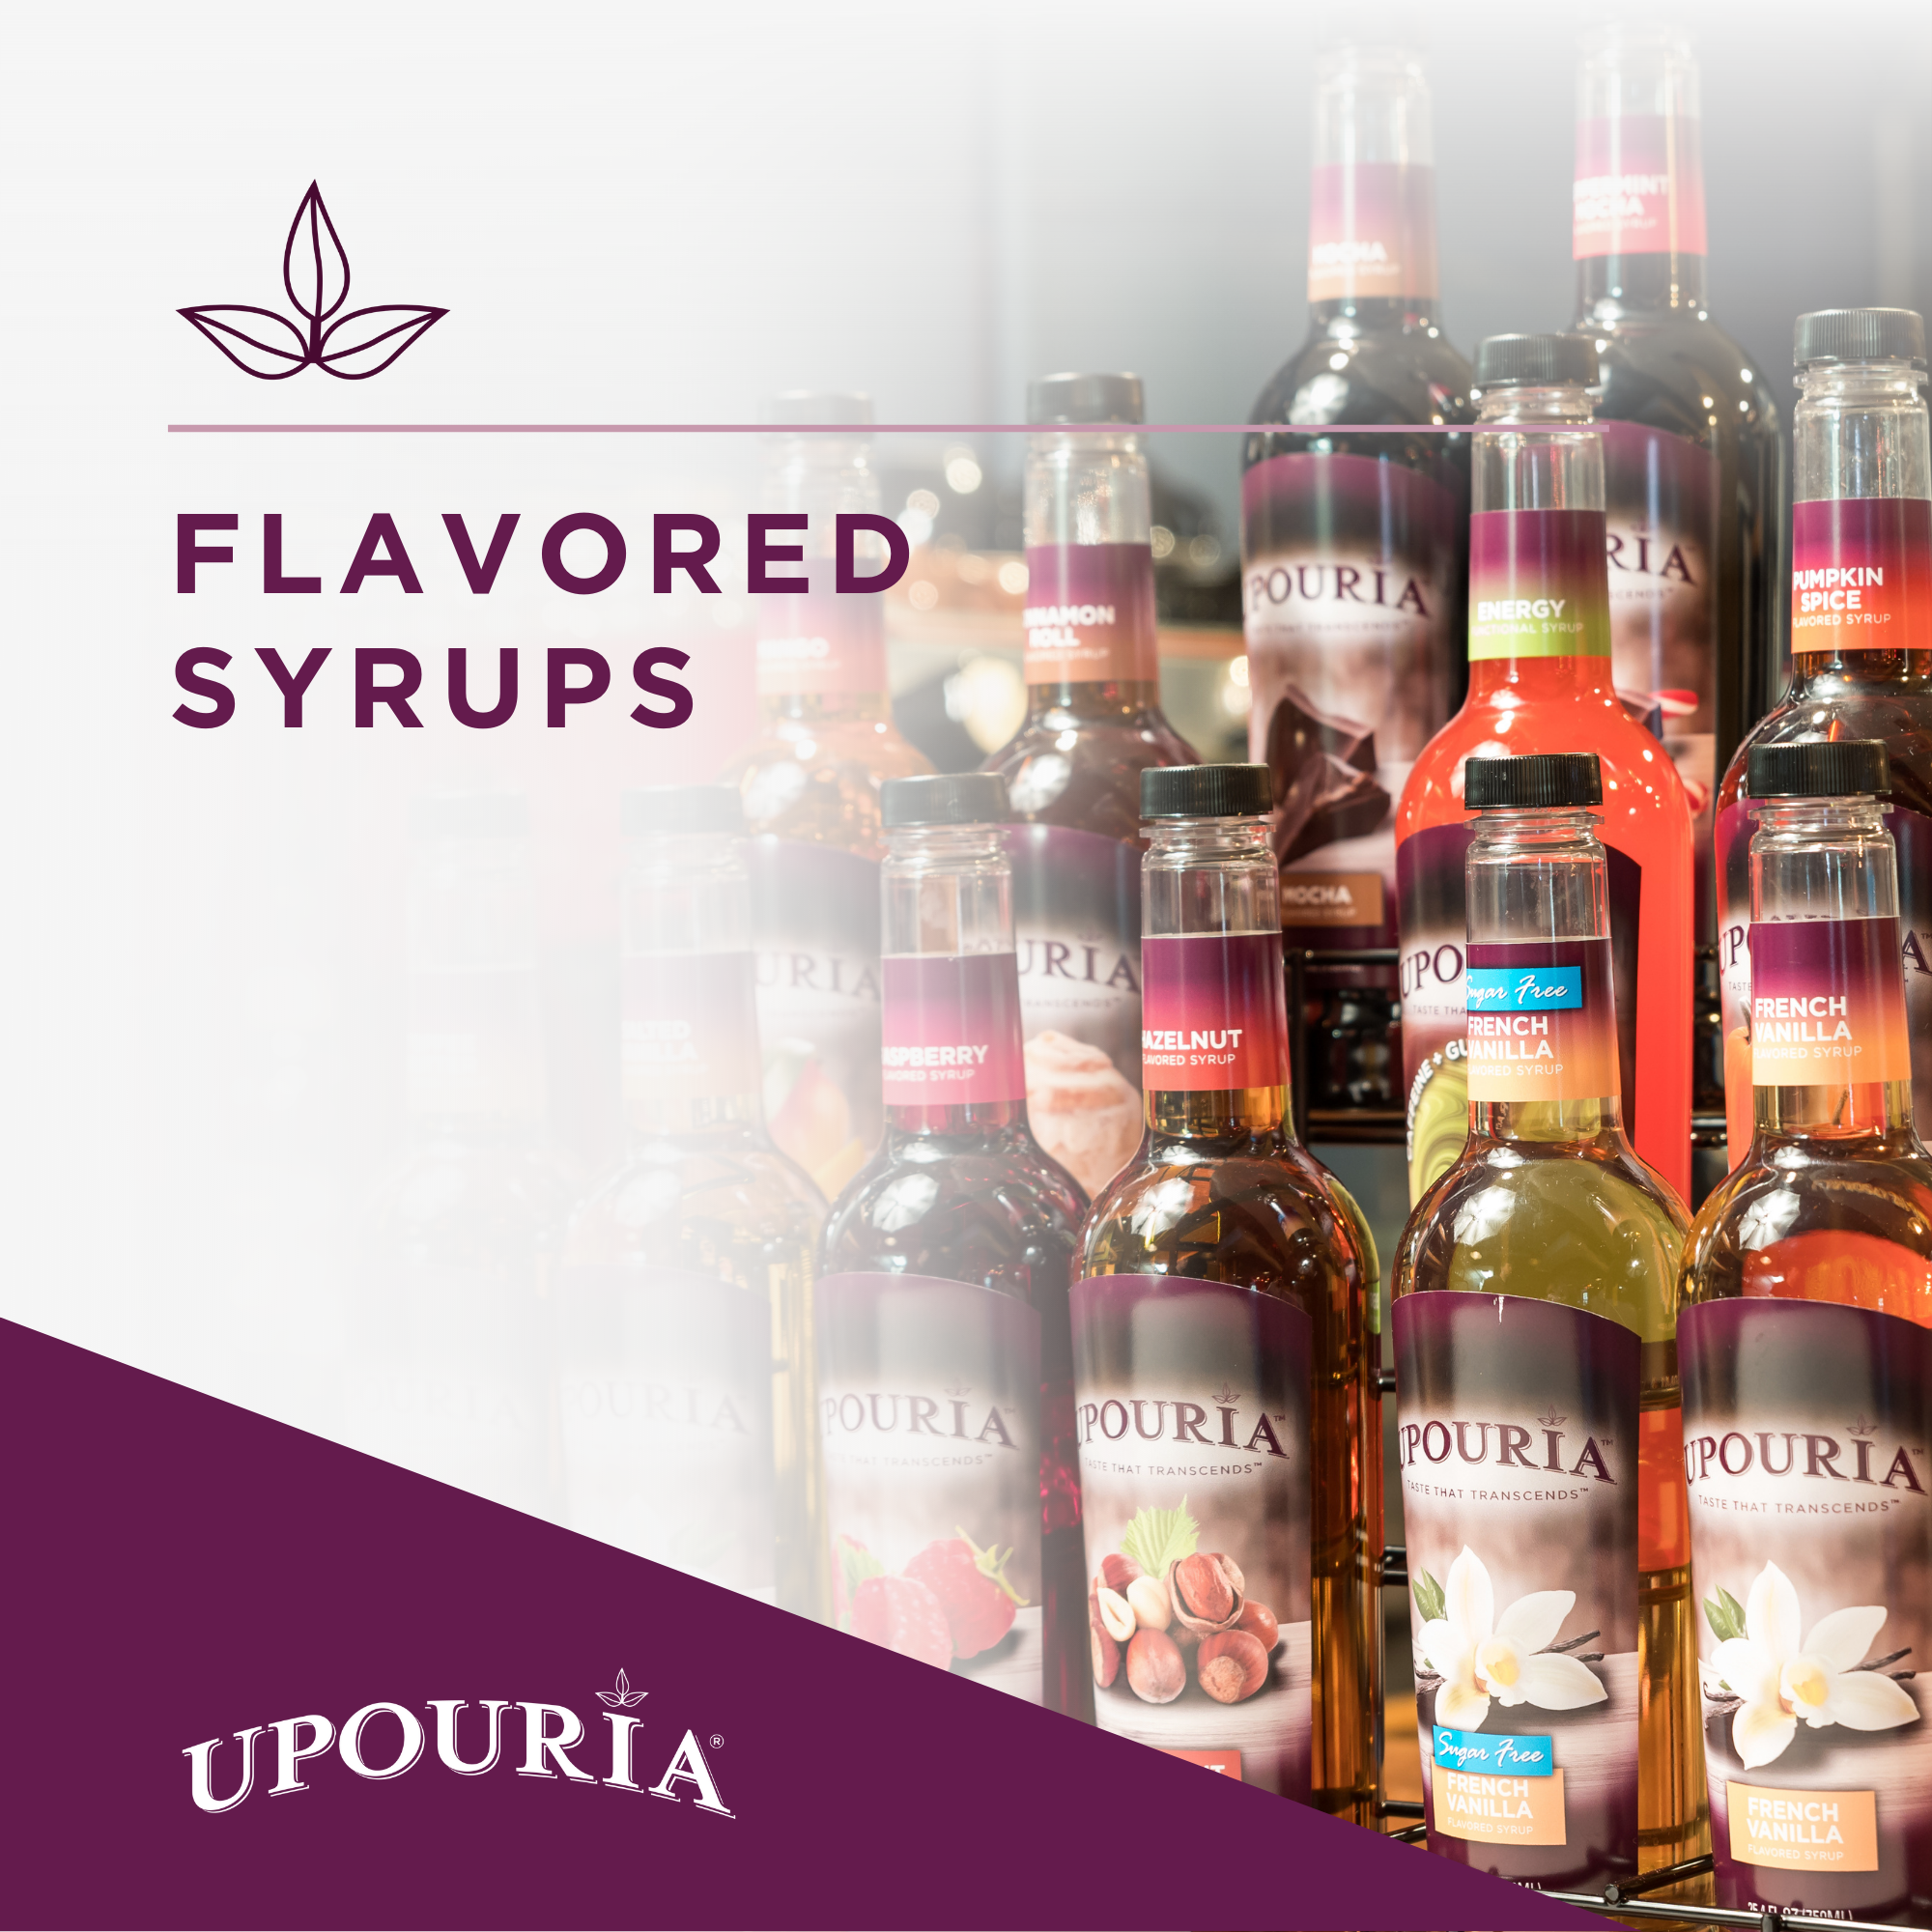 Upouria Flavored Syrups Featured Image 2022